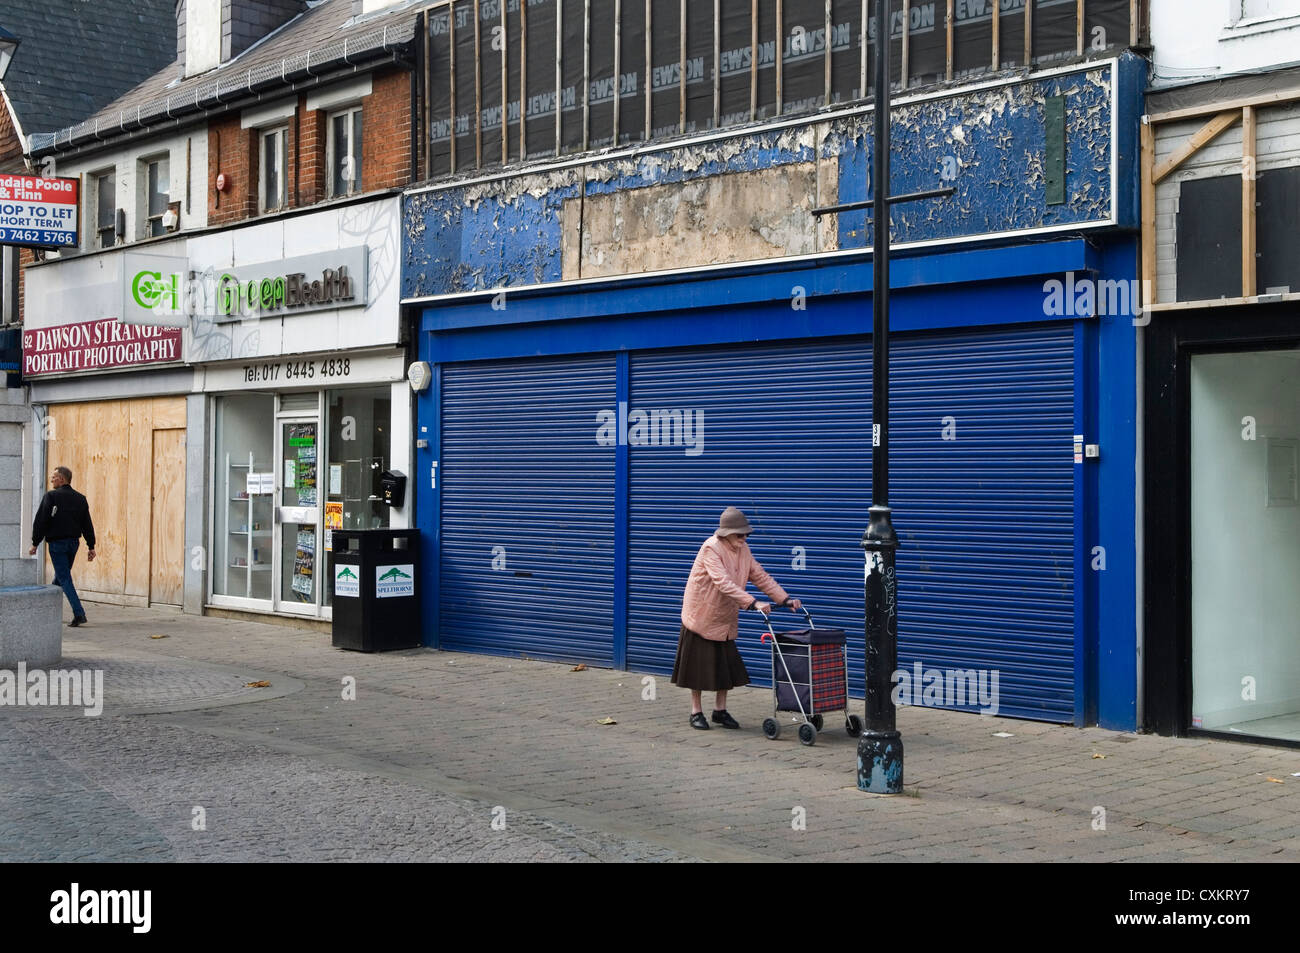 High street shops have gone out of business, a recession closed down. Four shops in a row in Staines. Middlesex. UK  2010s 2012 HOMER SYKES Stock Photo